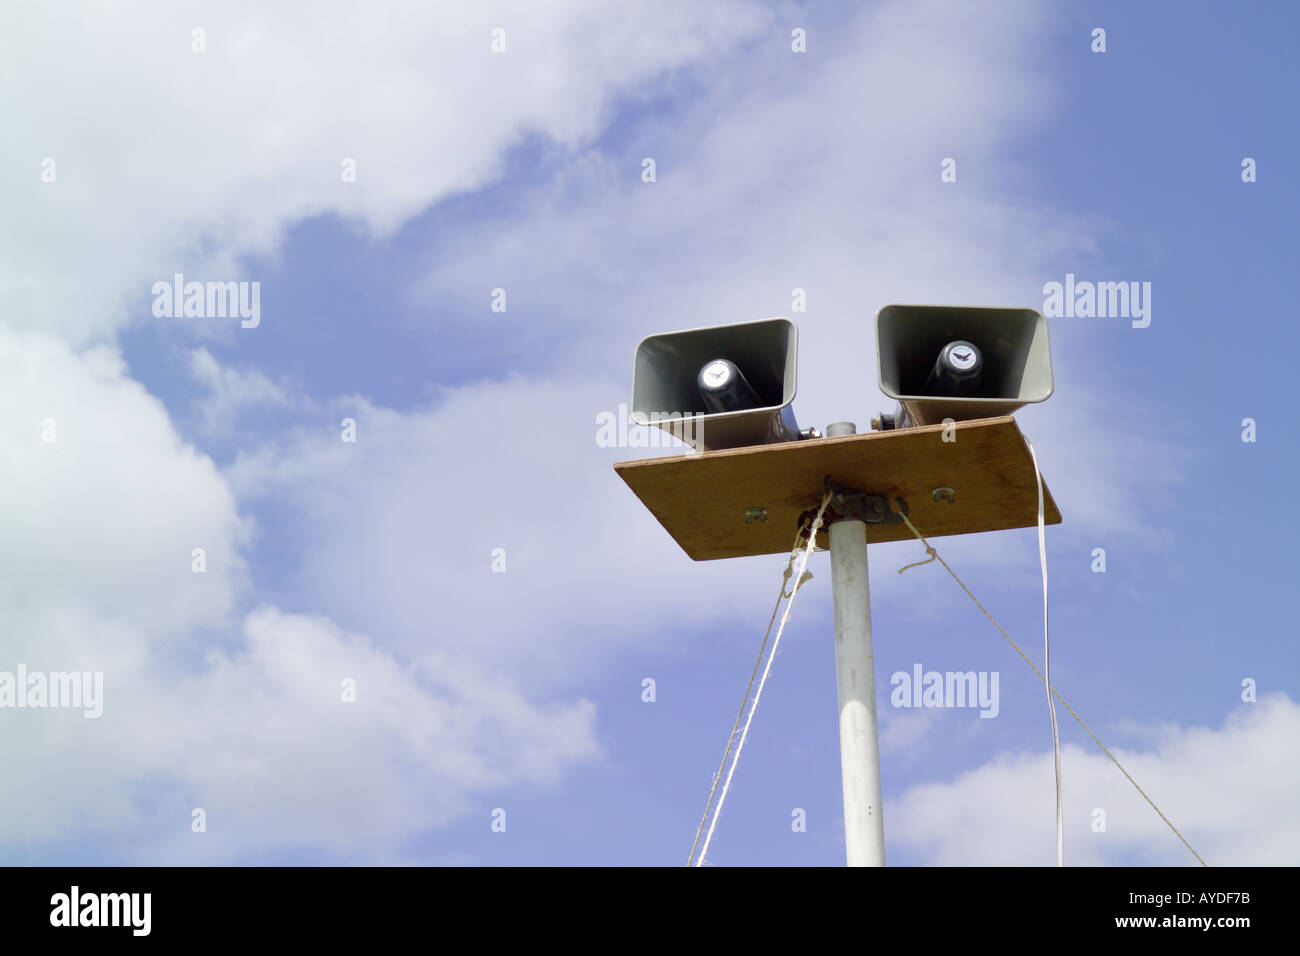 Loudspeakers on a pole with sky in the background at a fete Stock Photo